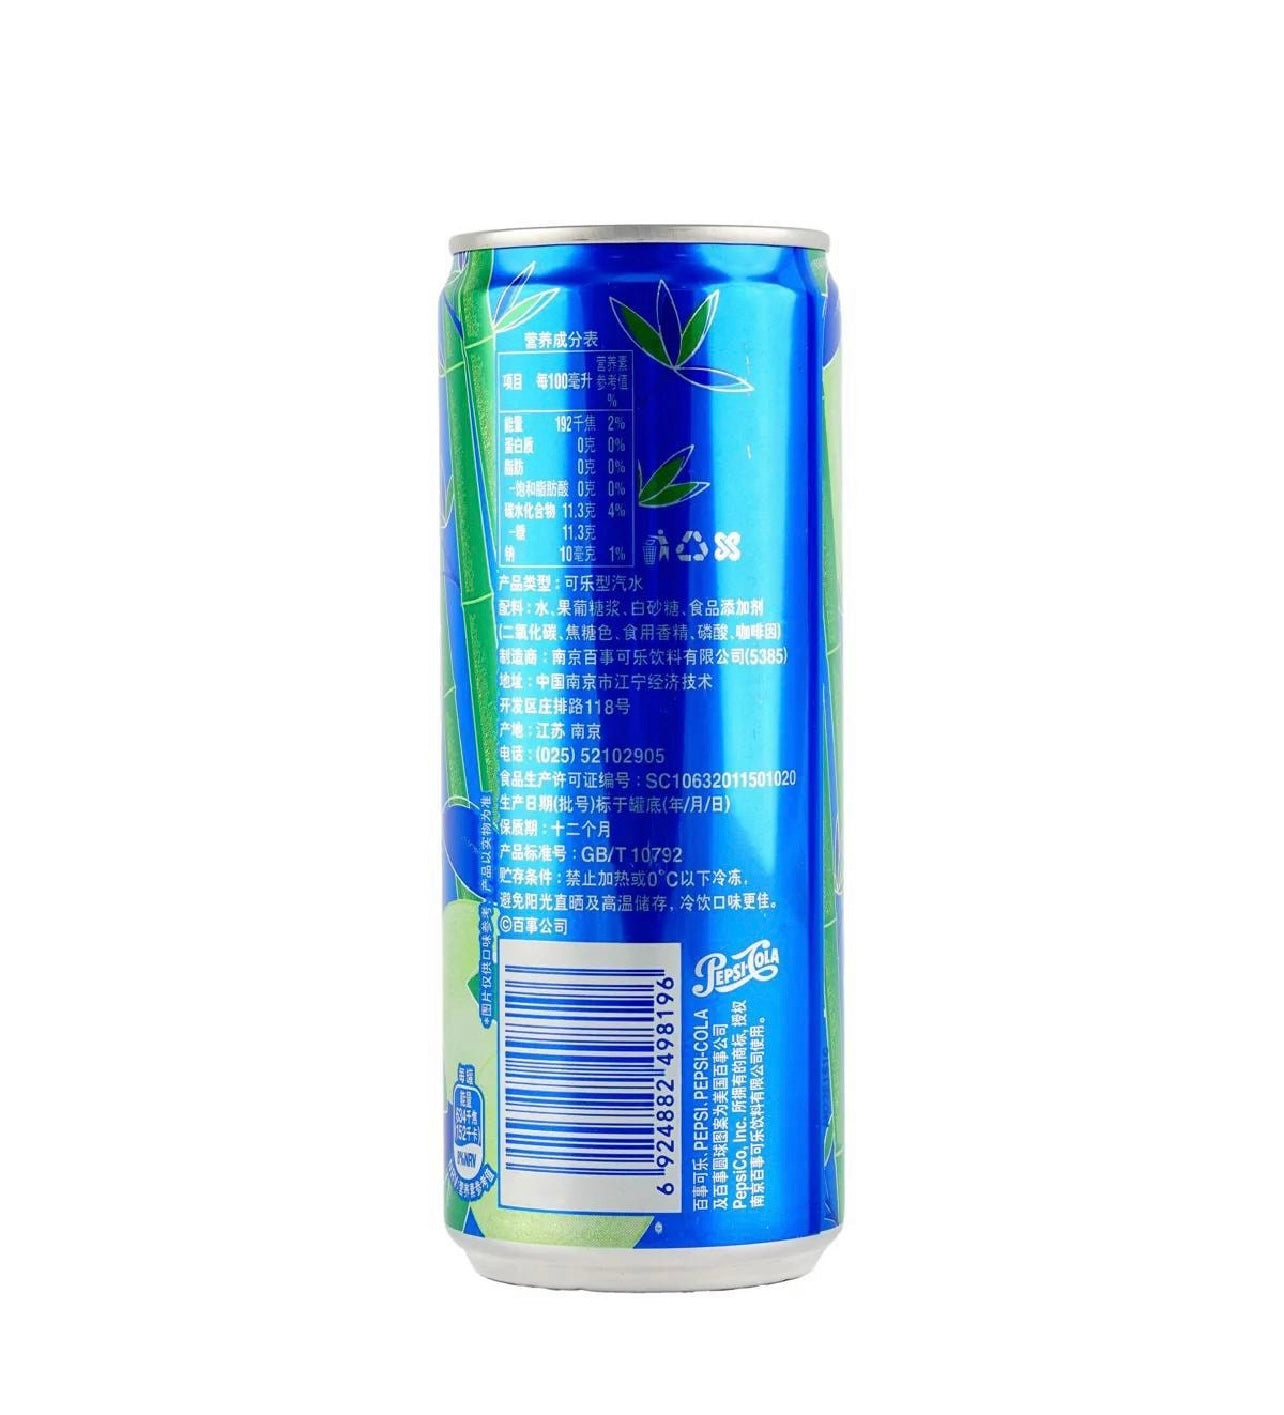 Pomelo and Bamboo Flavor, Can 11.16 fl oz